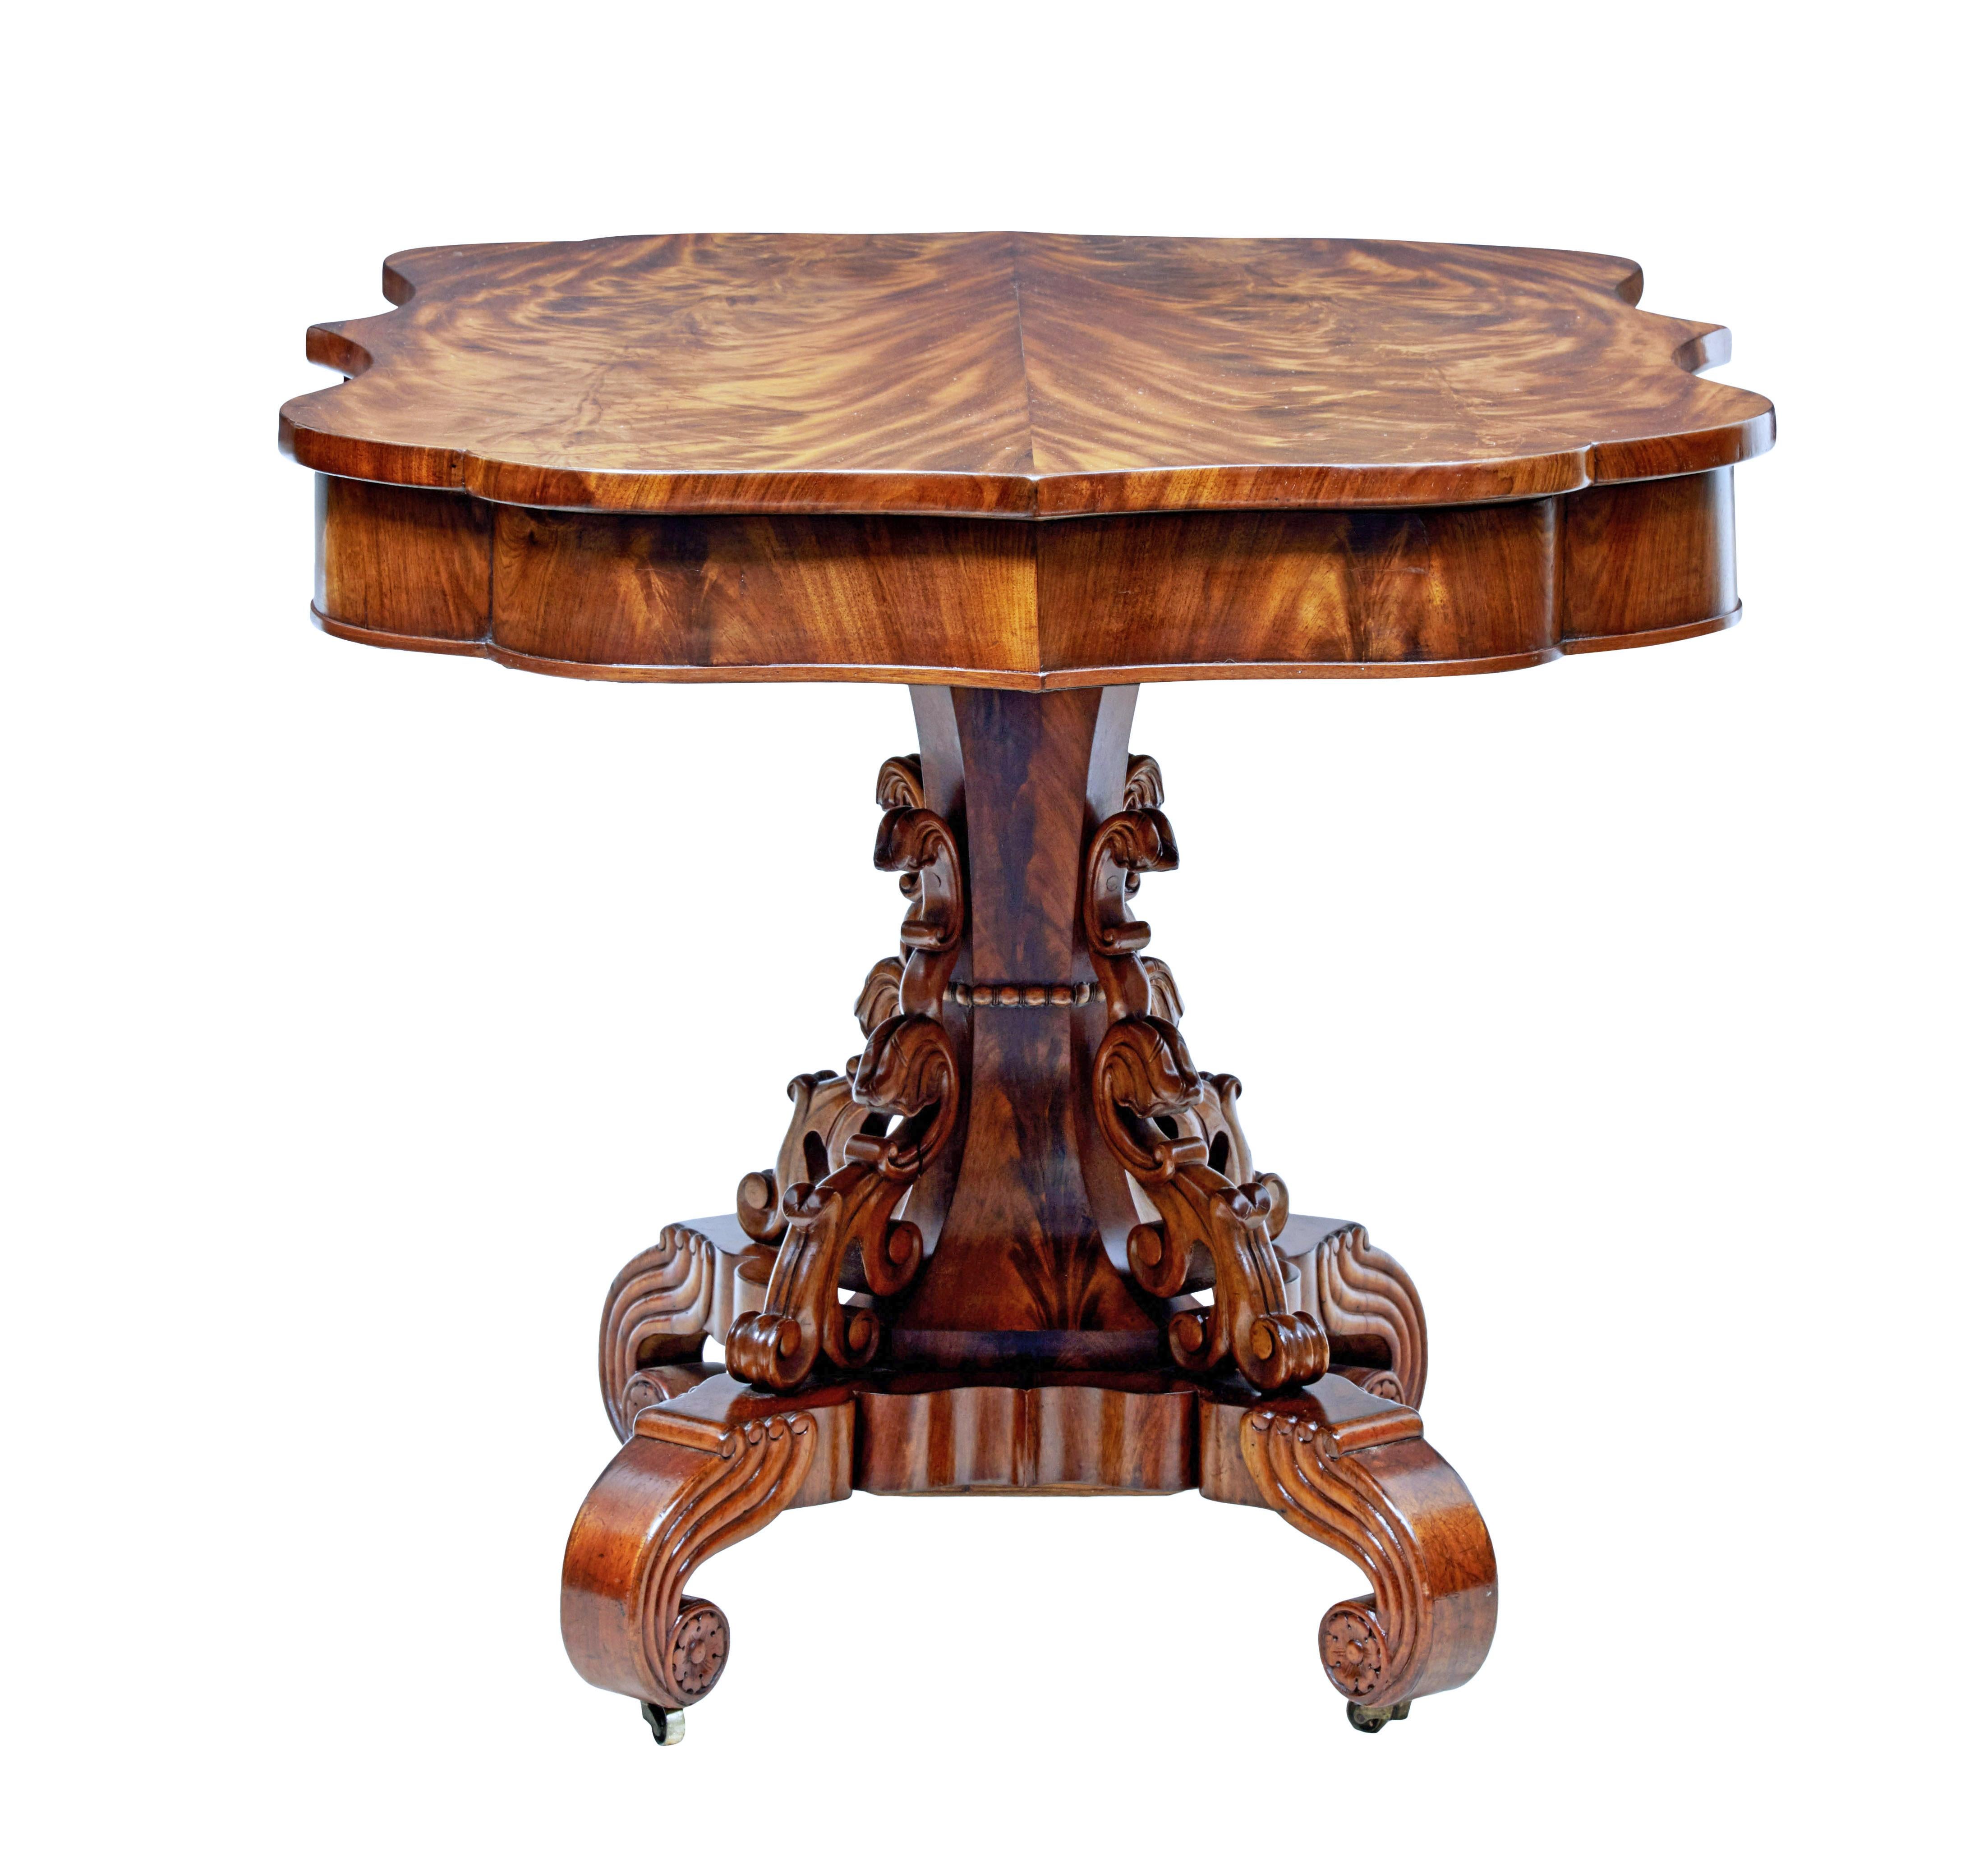 Stunning mid-19th century Danish mahogany center table, circa 1860.

Beautifully shaped top surface with striking half matching veneer top. Standing on a fluted stem with applied pierced carvings. Standing on a quadriform shaped base and carved